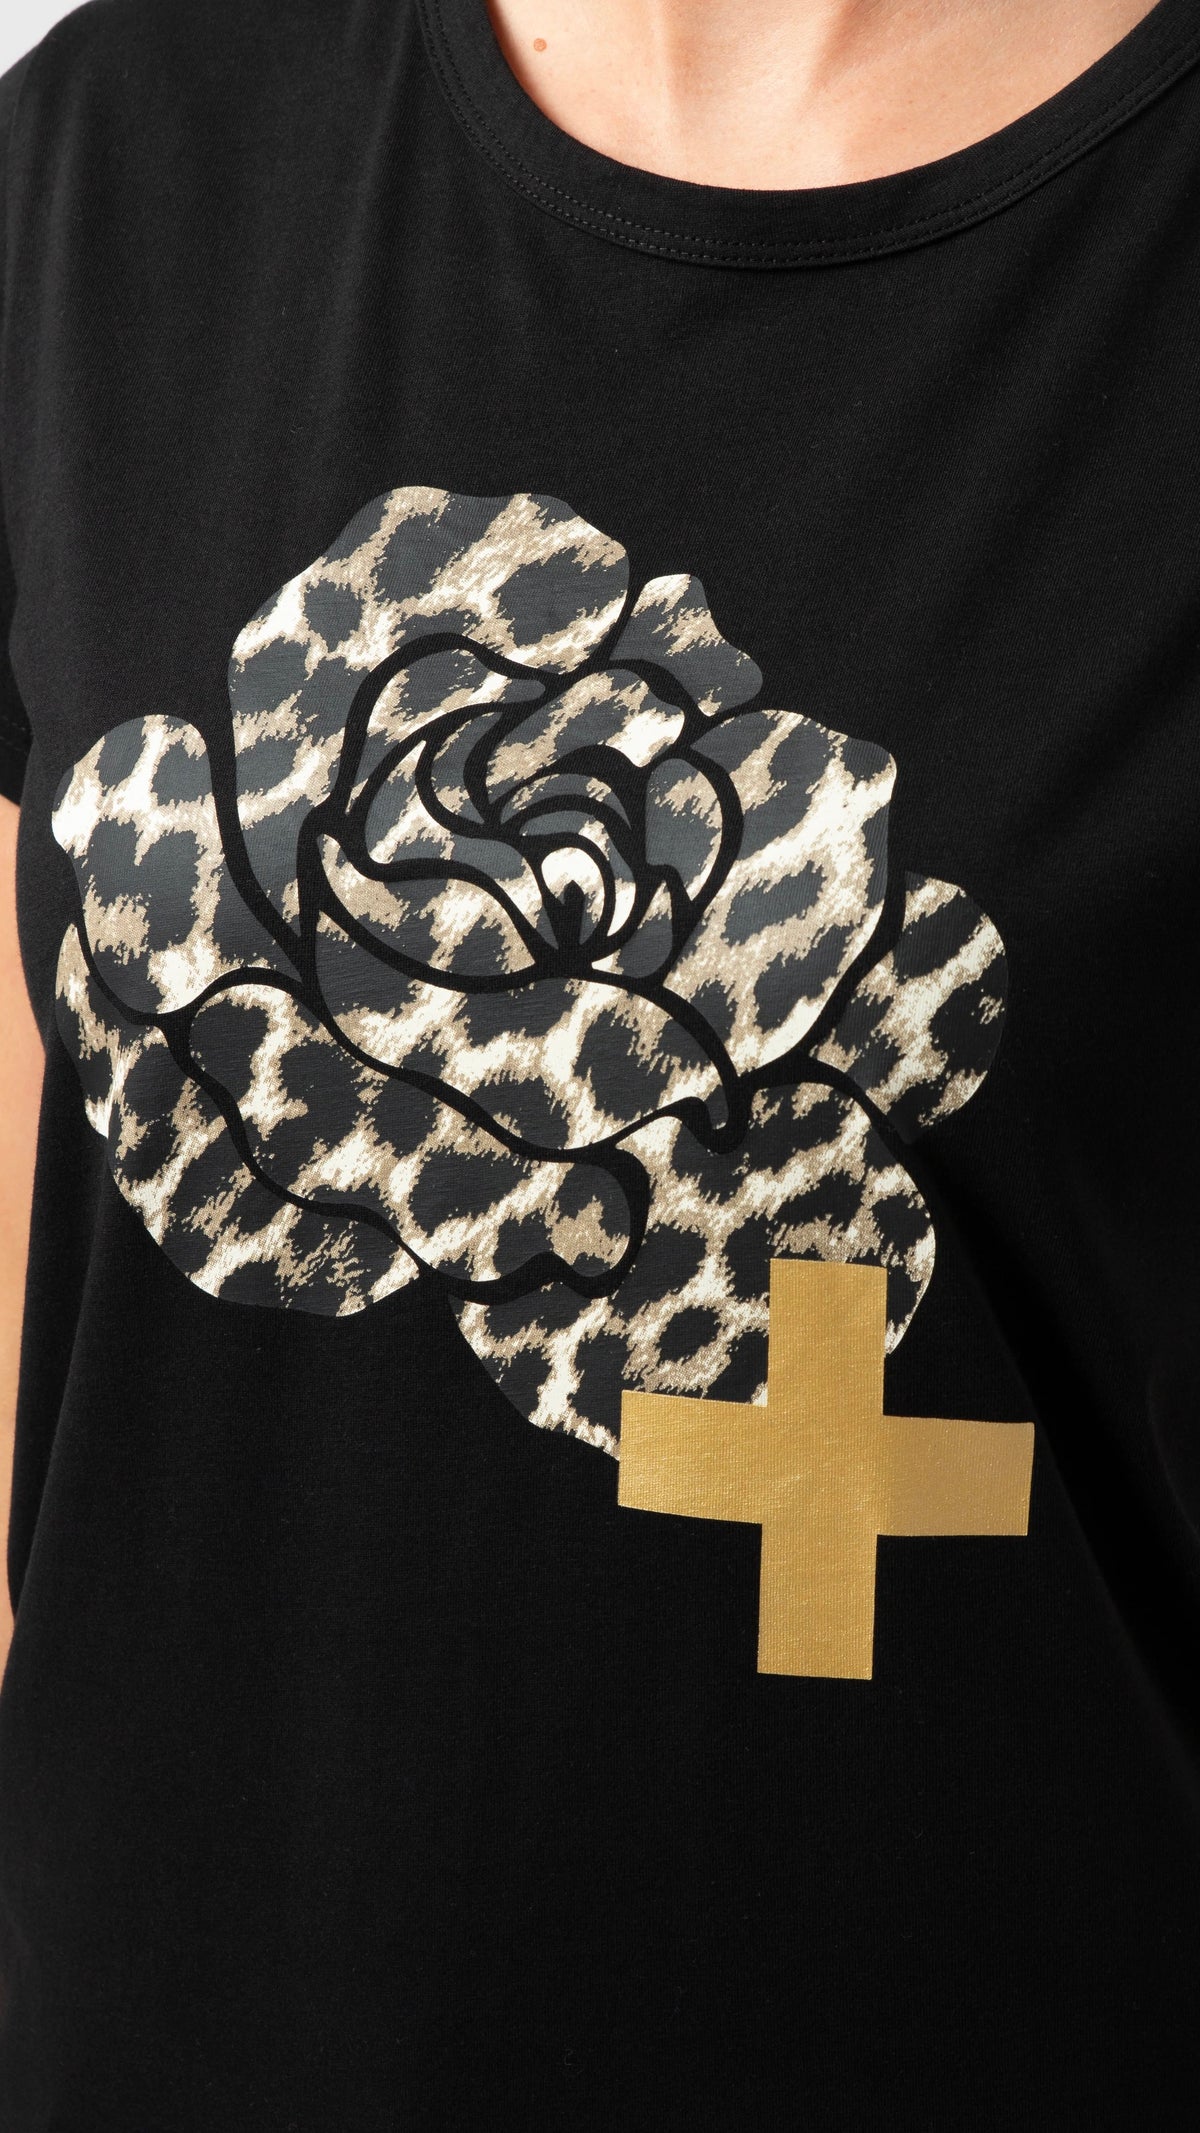 Ace Tee Black with Leopard Rose